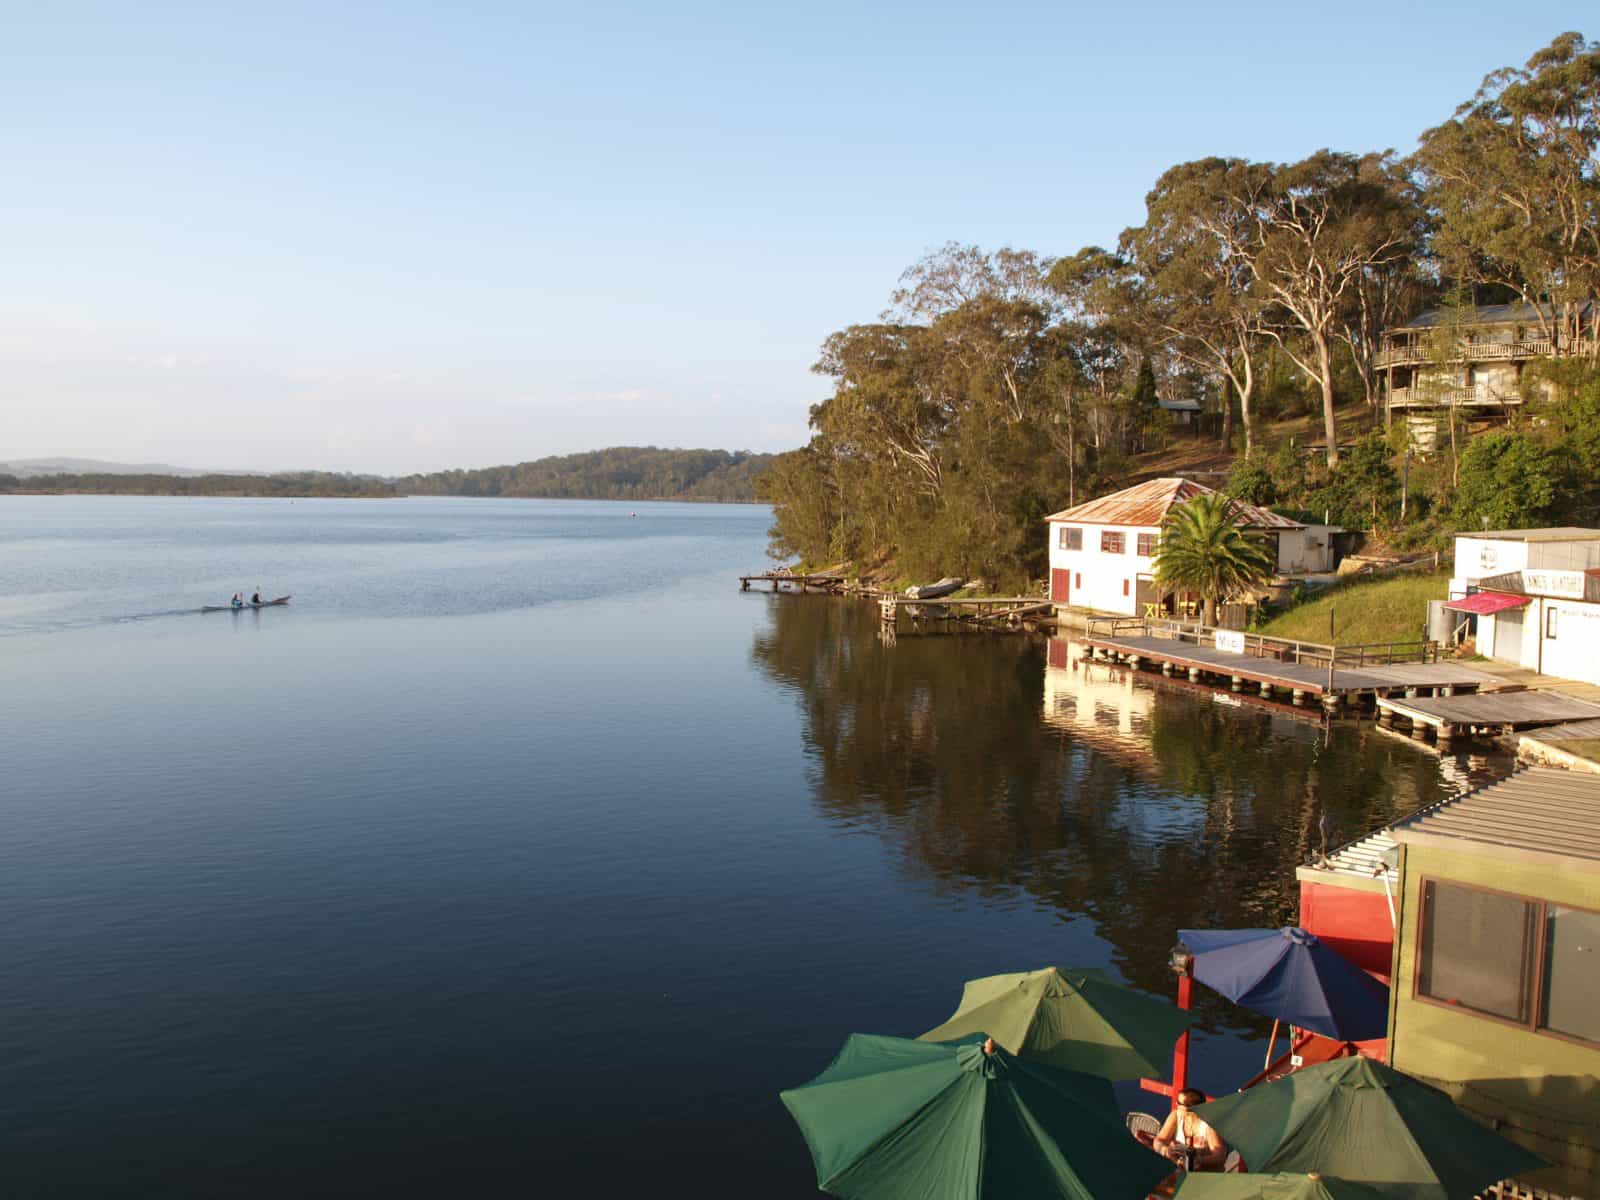 Boatshed and Cafe's on the water at Tuross Head